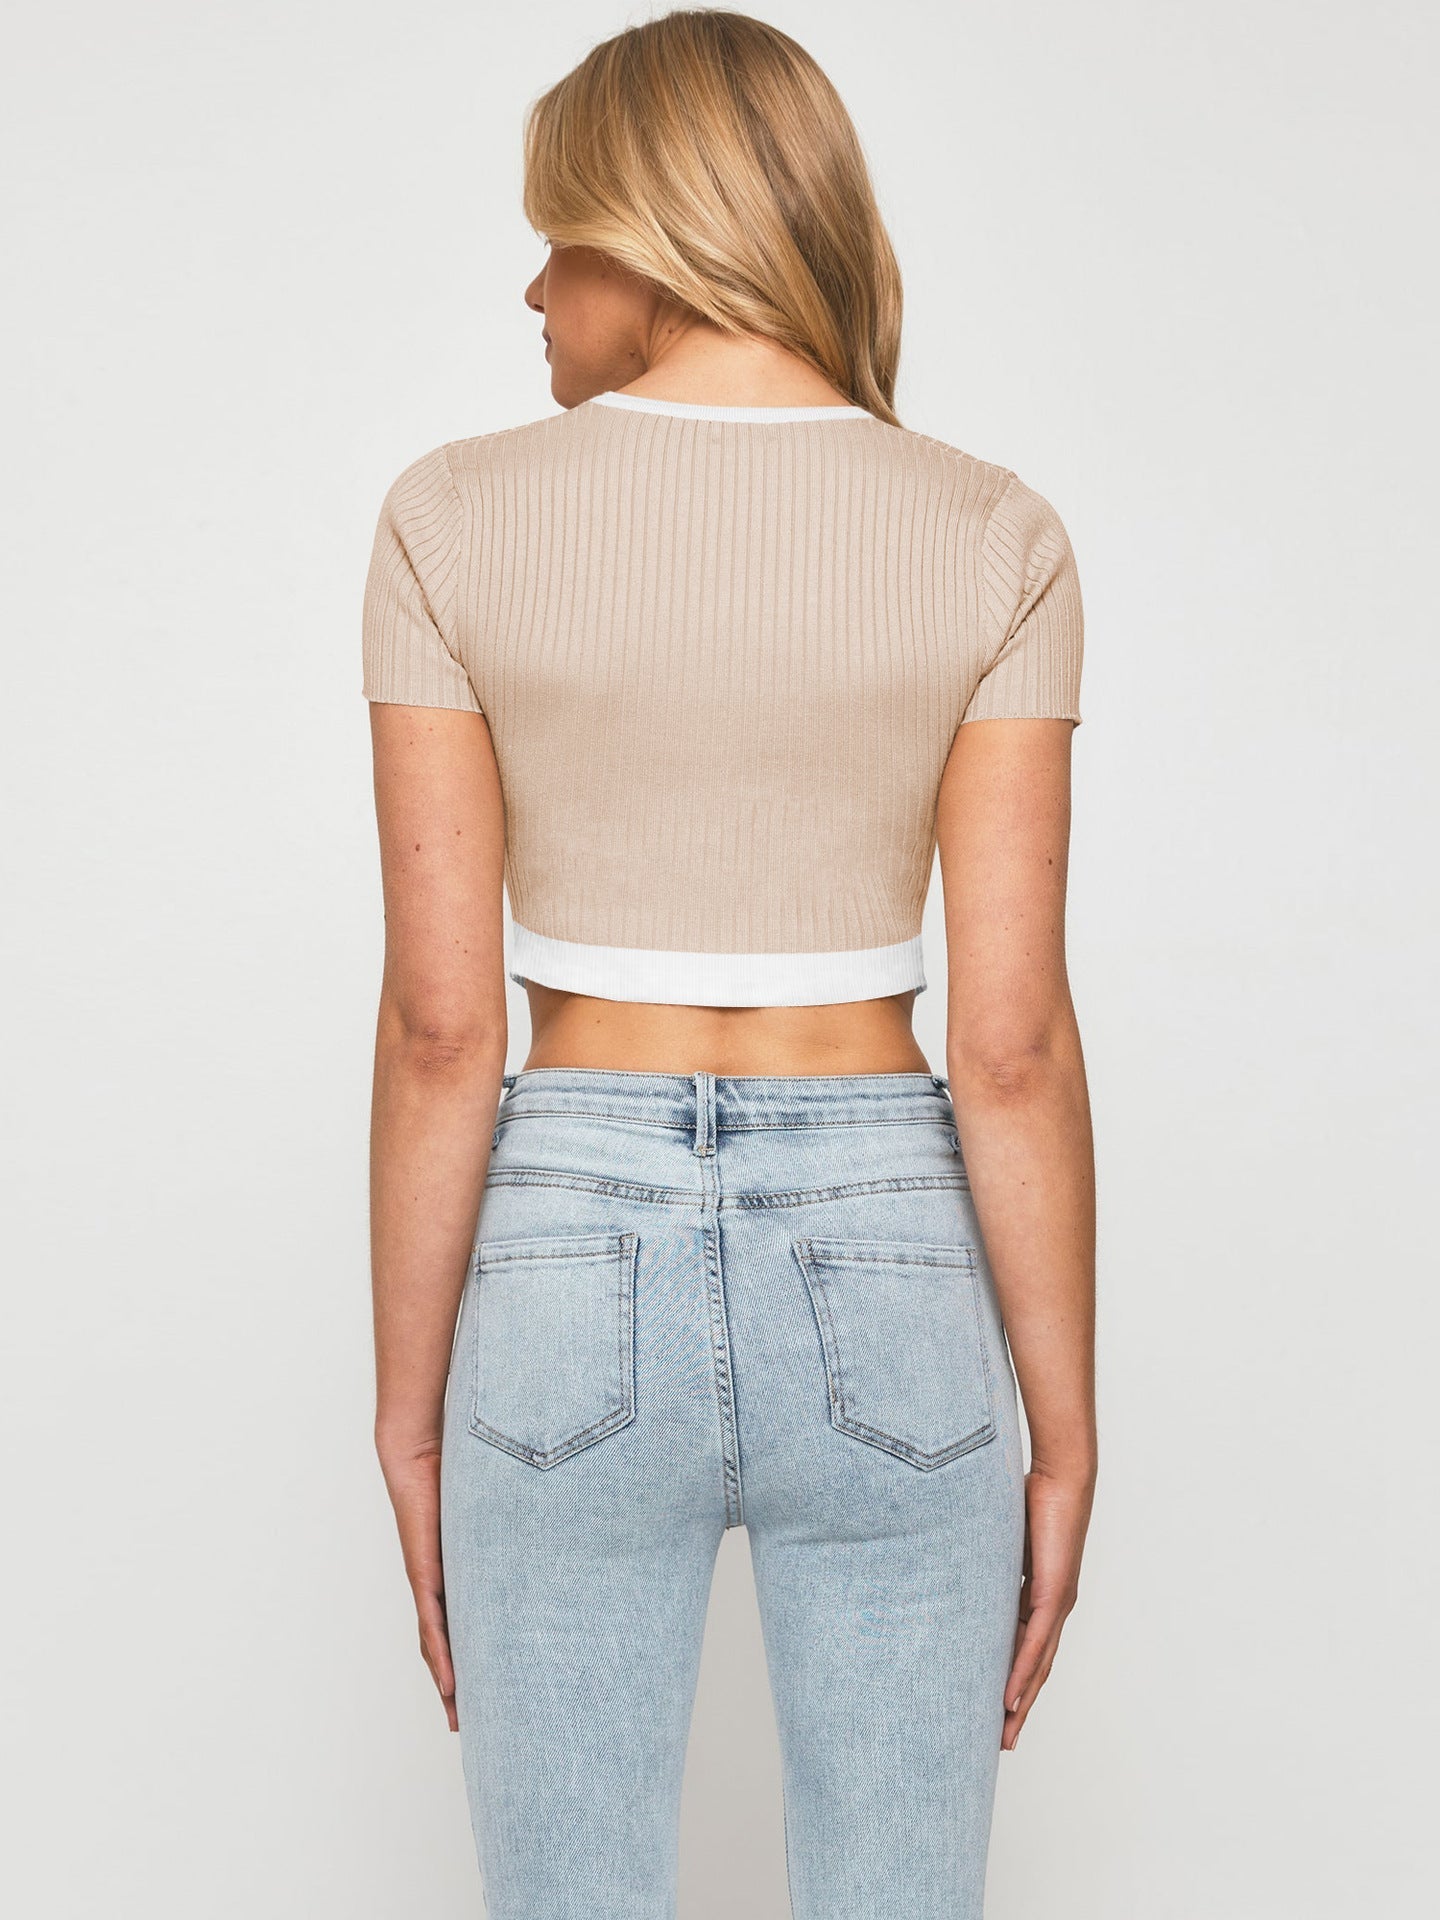 Trim Pointed Hem Ribbed Crop Top - Women’s Clothing & Accessories - Shirts & Tops - 9 - 2024